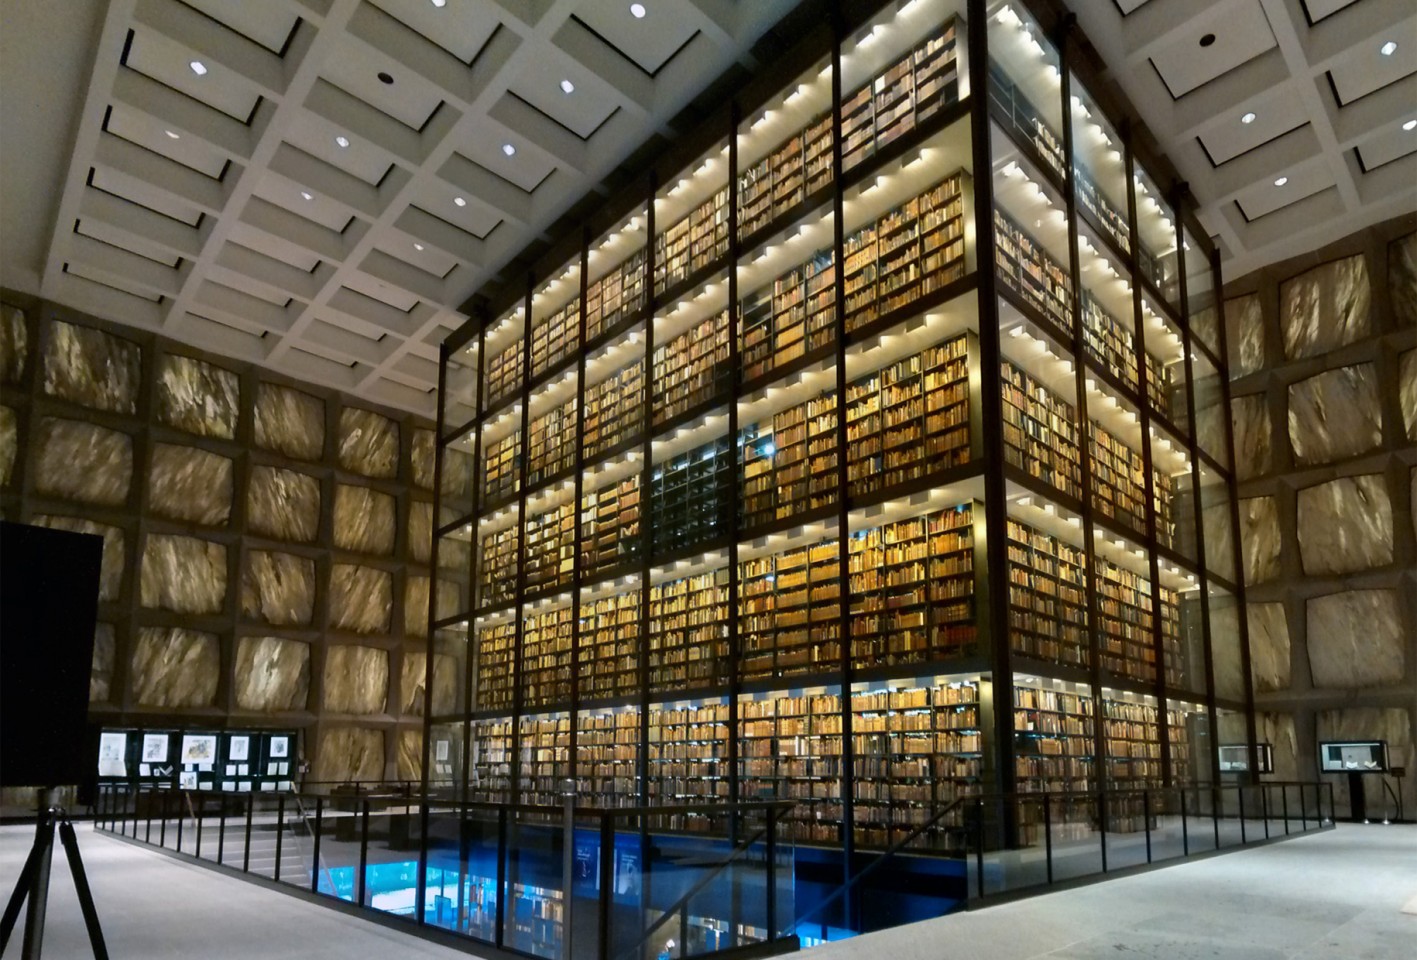 Beinecke Rare Book and Manuscript Library（バイネッケ・レア・ブック & マヌスクリップト図書館）